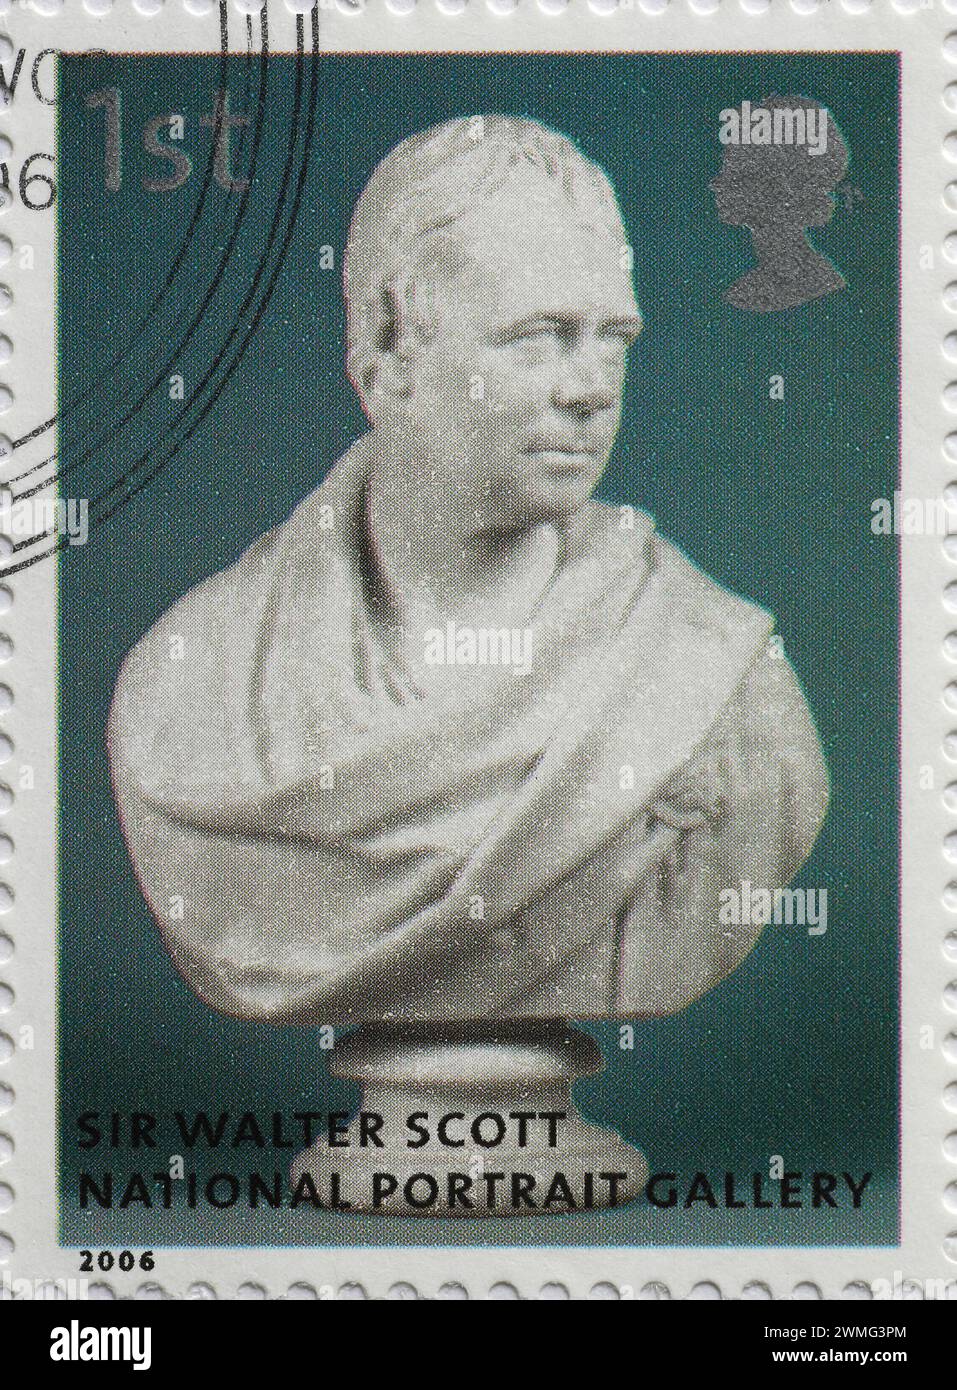 Walter Scott from the National Portrait Gallery on postage stamp Stock Photo